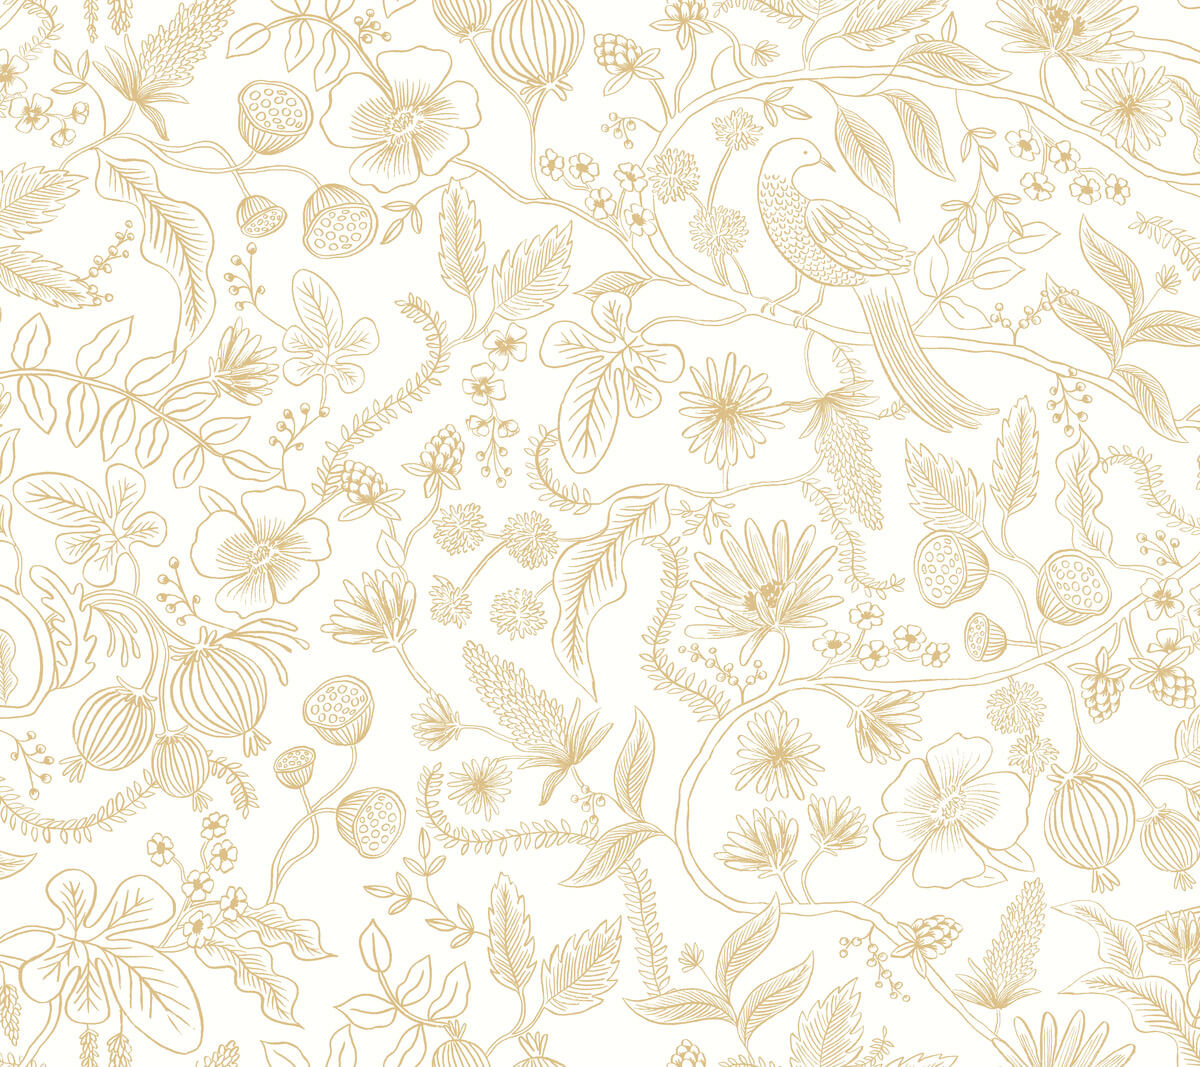 Rifle Paper Co. Aviary Peel & Stick Wallpaper - Off White & Gold